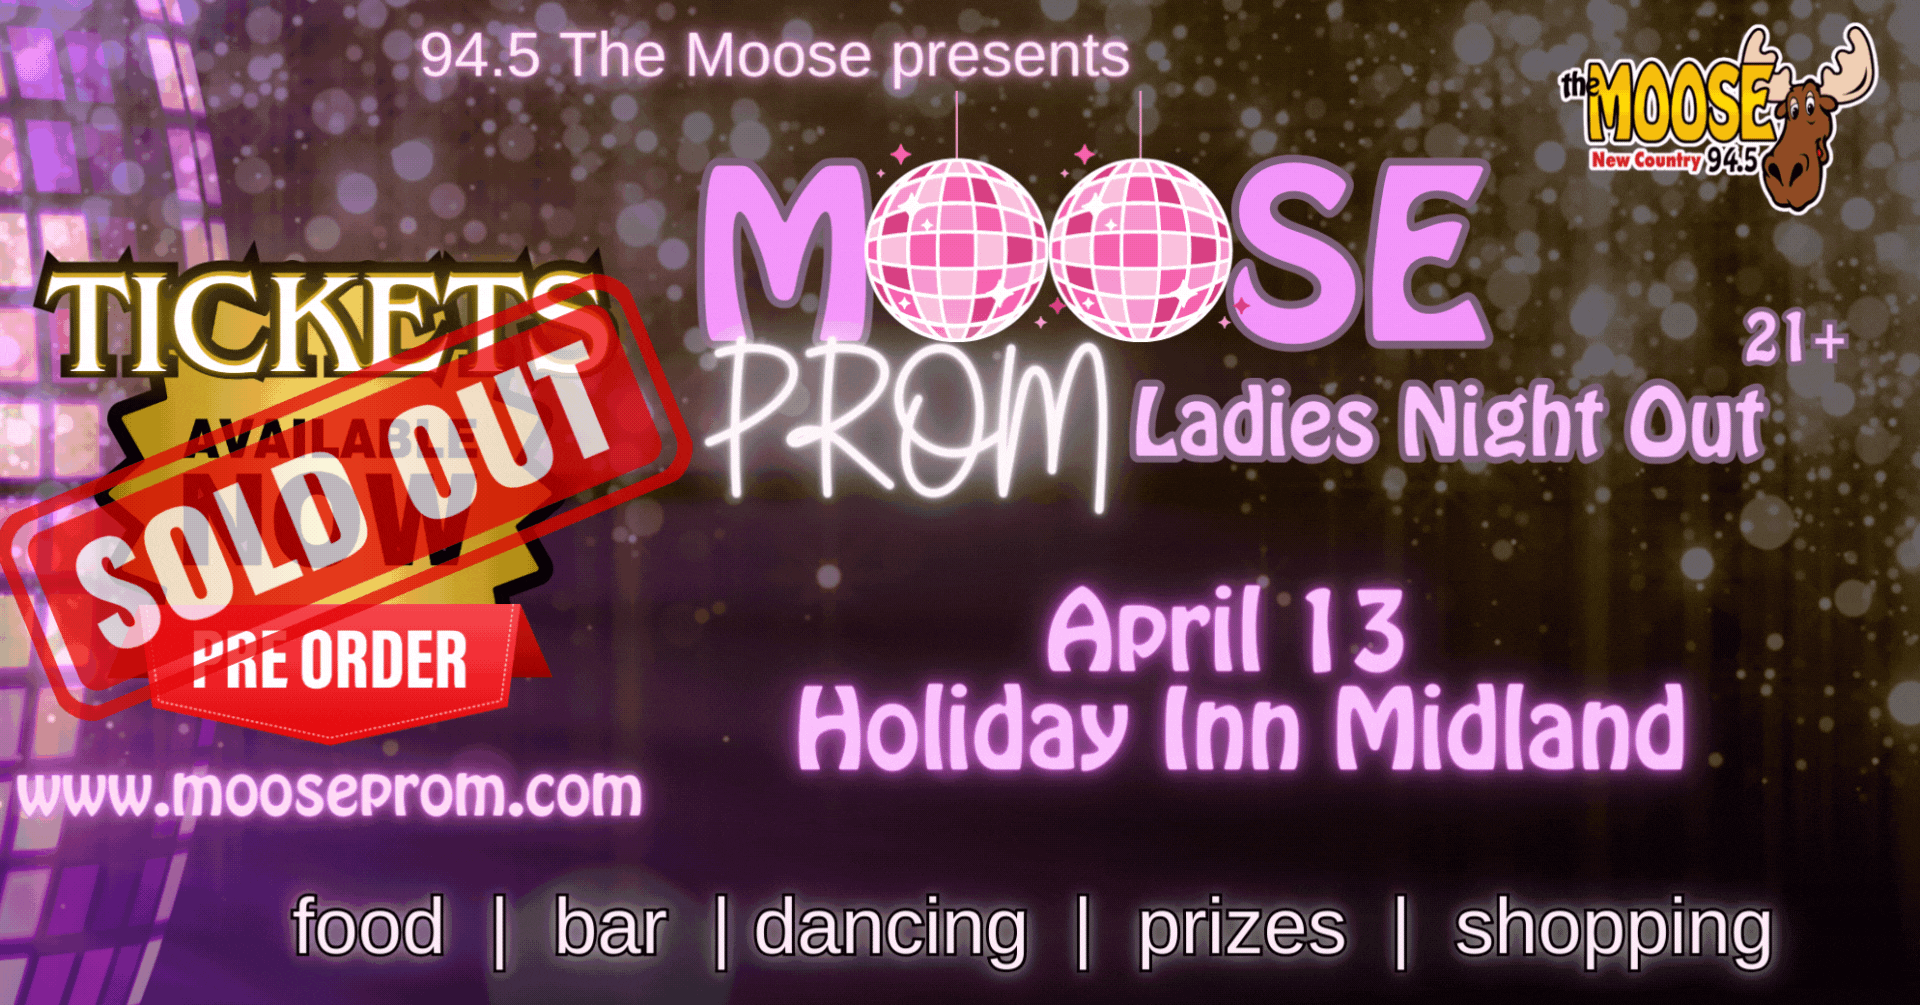 MOOSE MOM PROM FB EVENT GIF 1920 x 1005 SOLD OUT